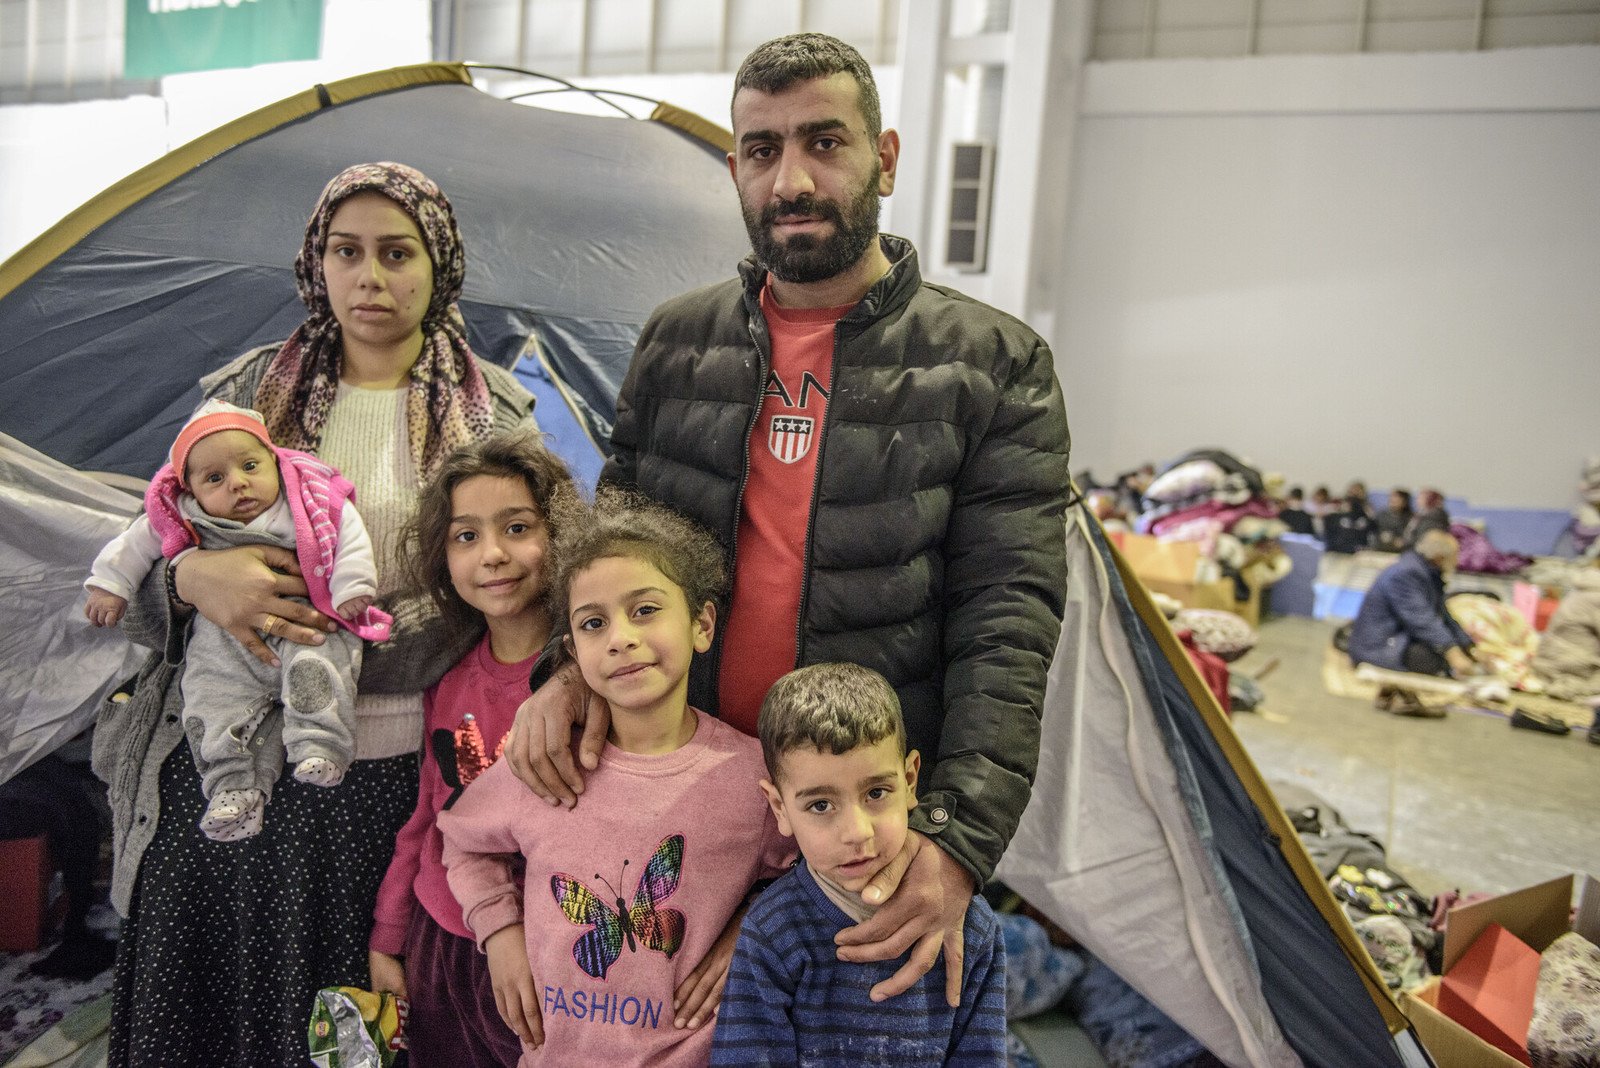 Ali Dalmen, his wife Betul and their four children survived the earthquake and now live in a warehouse building that is housing up to 7,000 people seeking shelter and refuge.  ‘We were shaking and we were so scared; I thought it was my last day. When I looked at the walls, I felt like they were moving towards me, so we went to a wide space to keep us safe,’ Ali Dalmen told us.